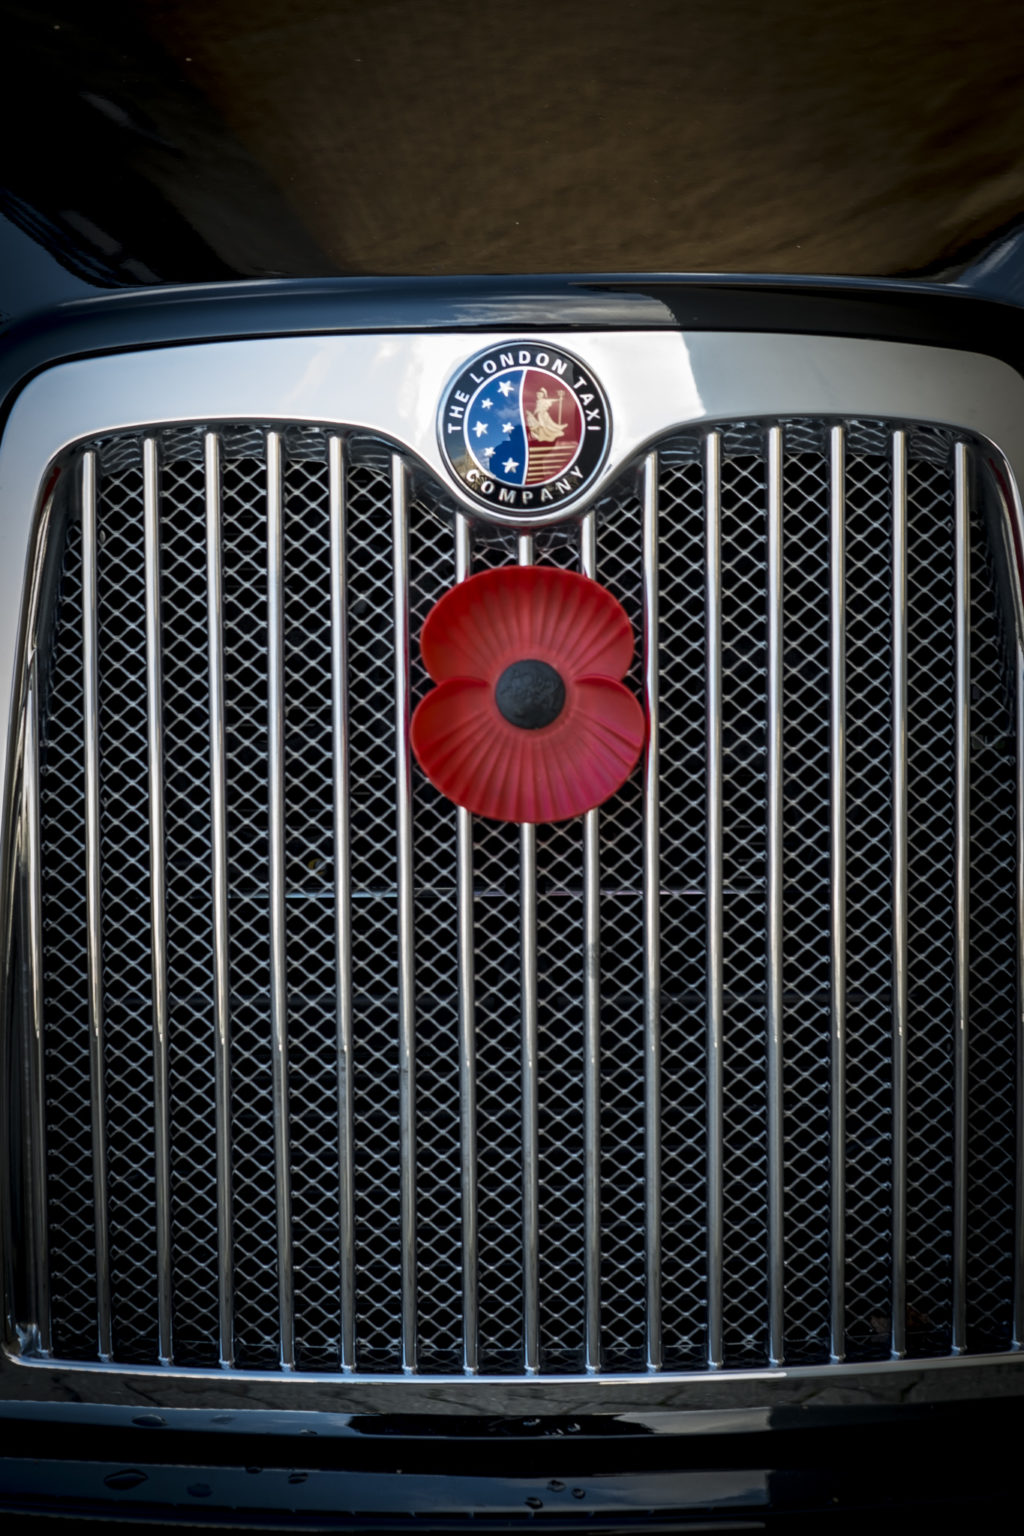 Poppy on the grill of a London Taxi